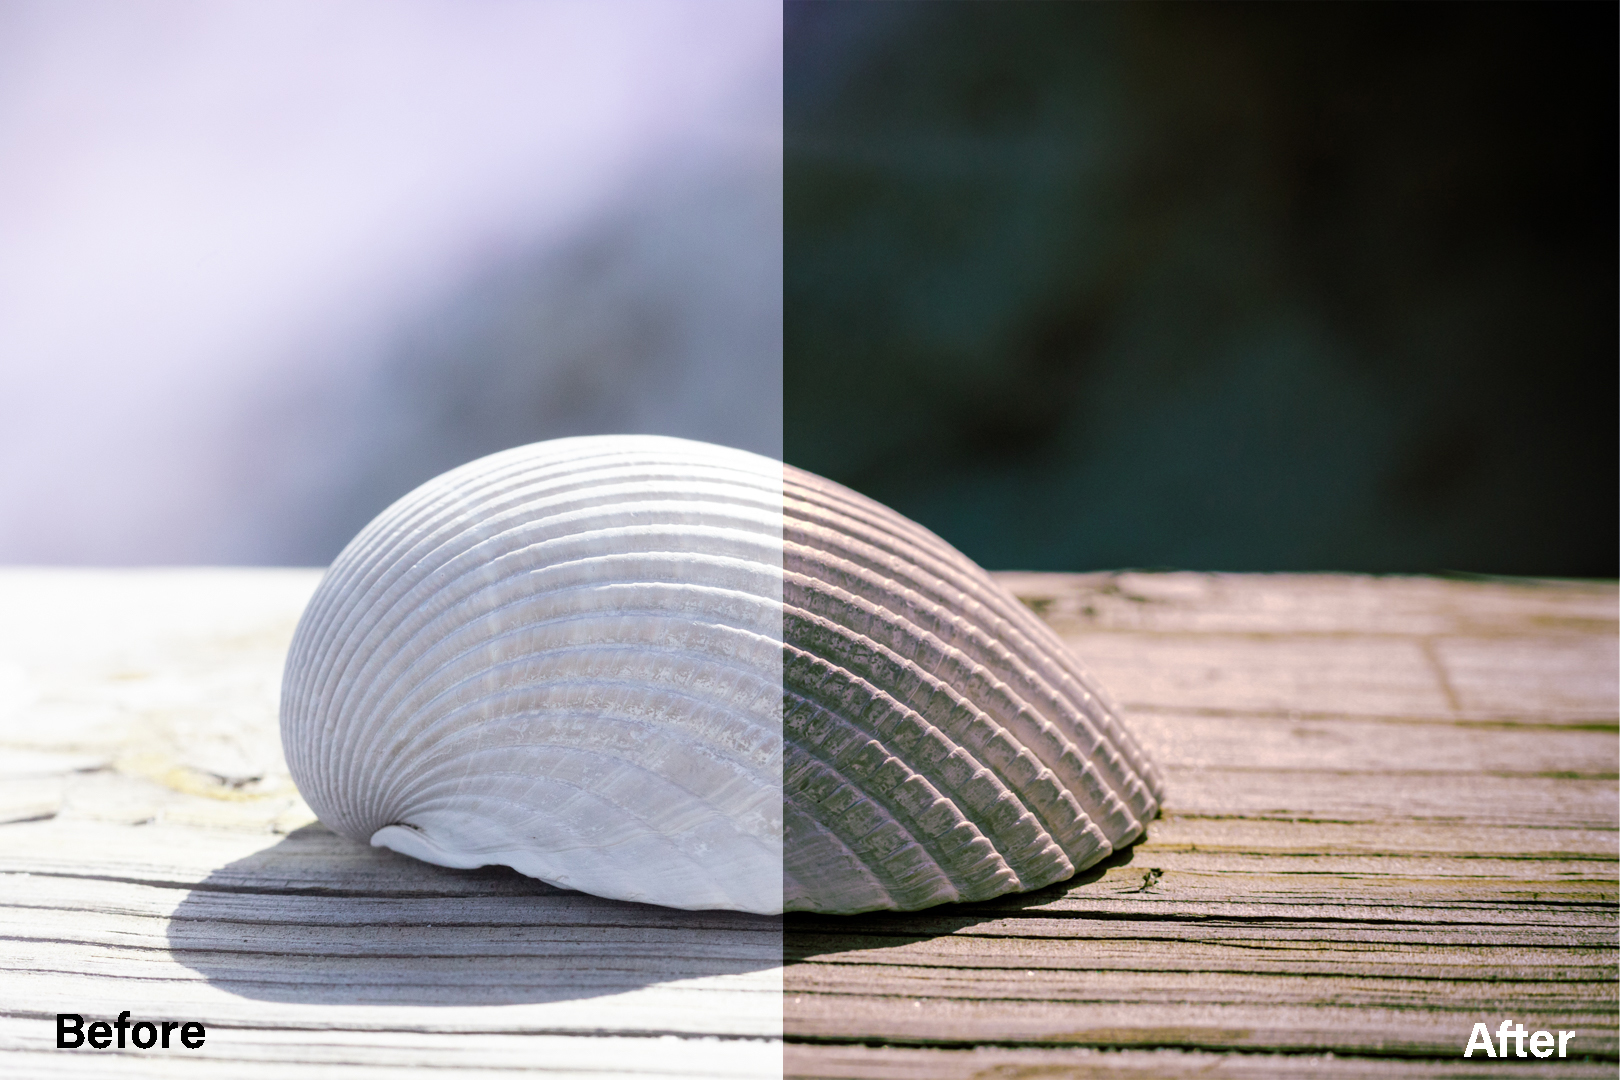 Before and After of Solo Sea Shell.